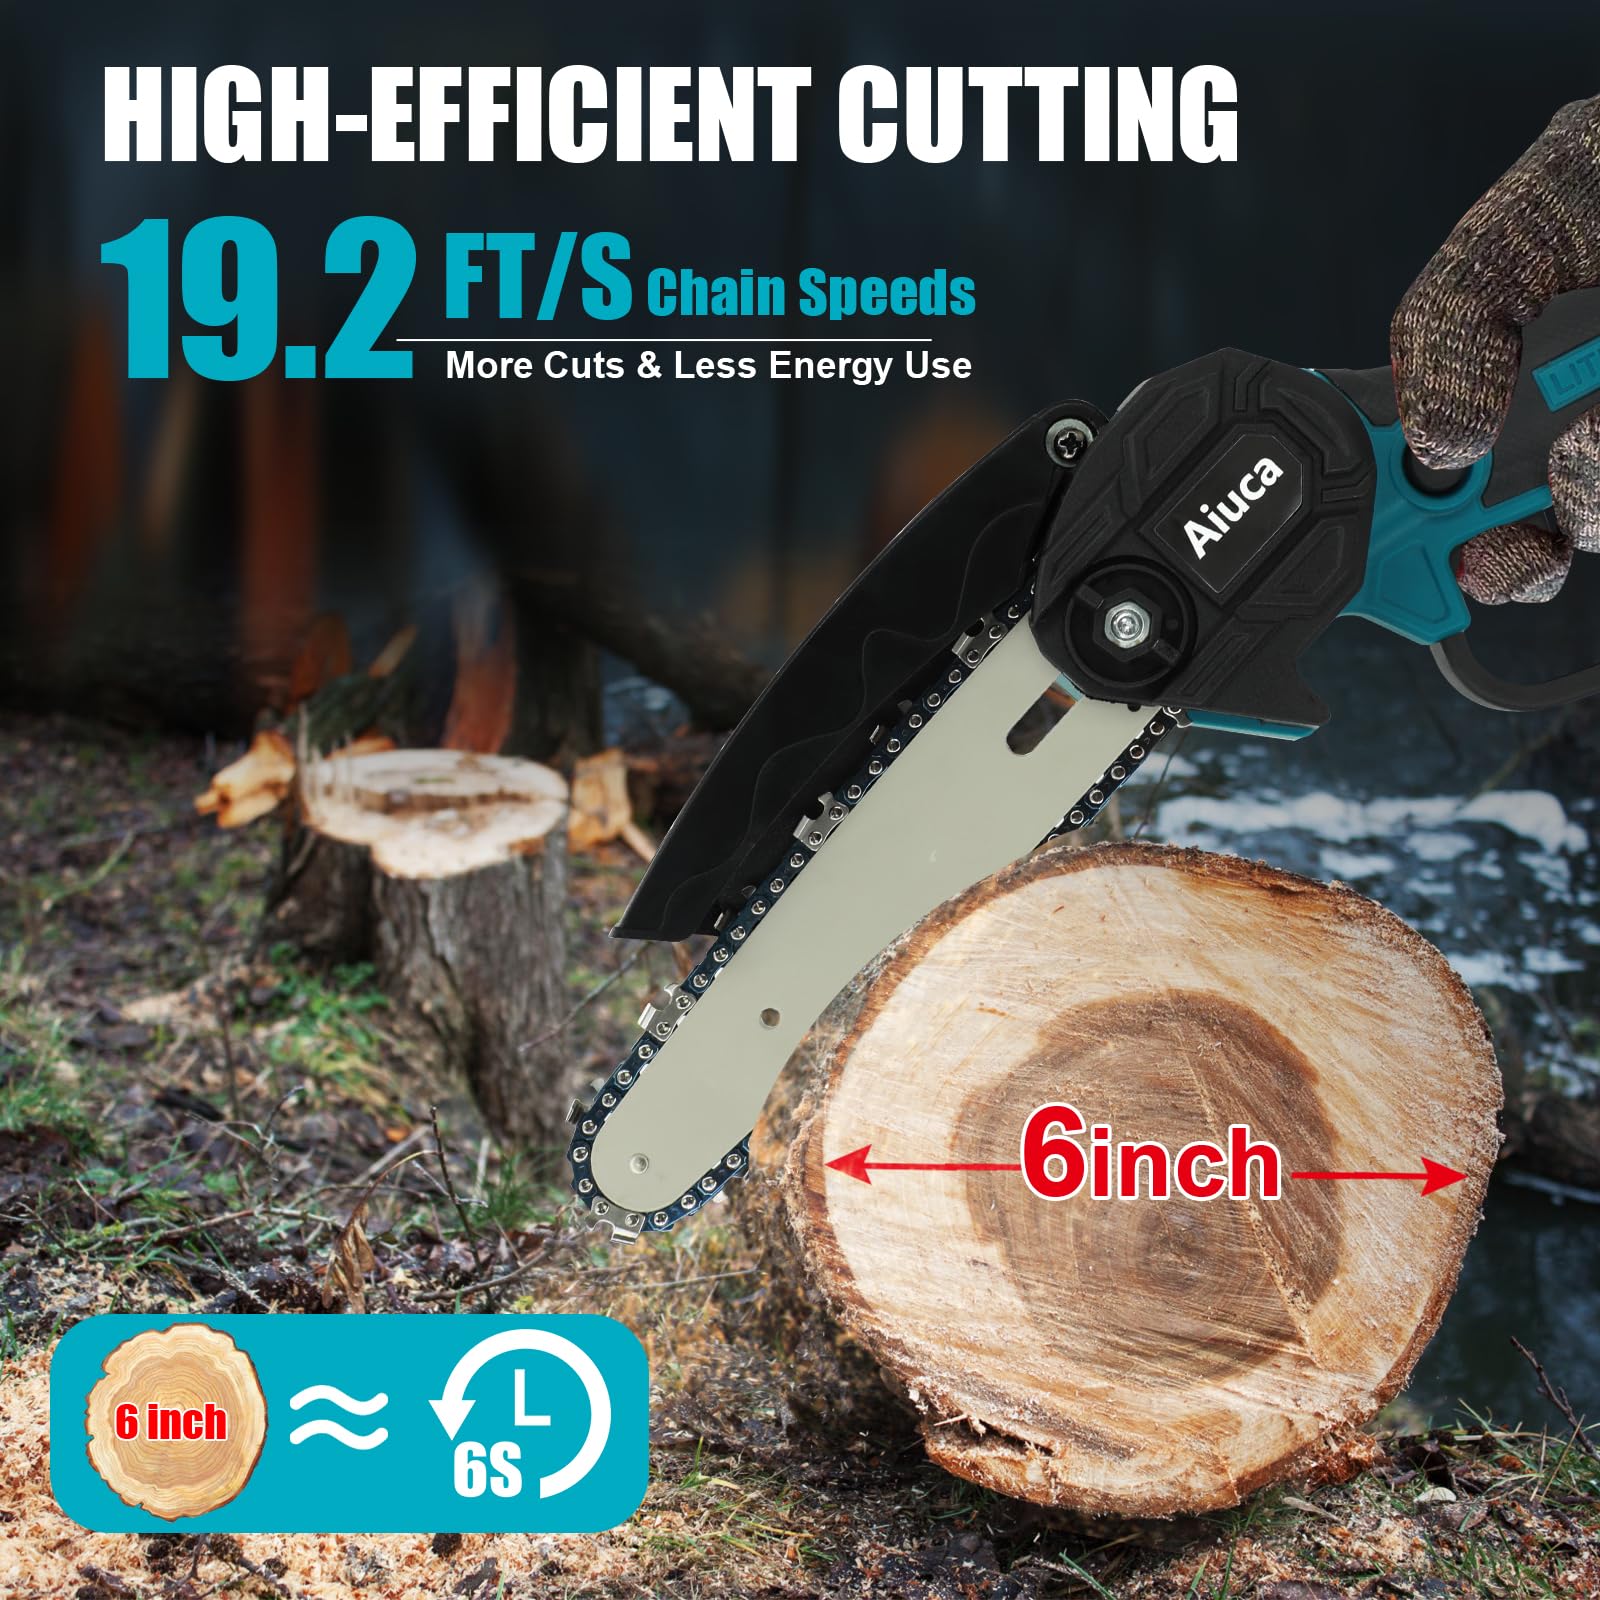 Mini Chainsaw 6-Inch Cordless power chain saws with Security Lock Small Handheld Chain Saw with 2 x 24V 6500mAh Battery 2 Chains for Wood Cutting, Tree Trimming, Gardening, Courtyard and Garden, Blue